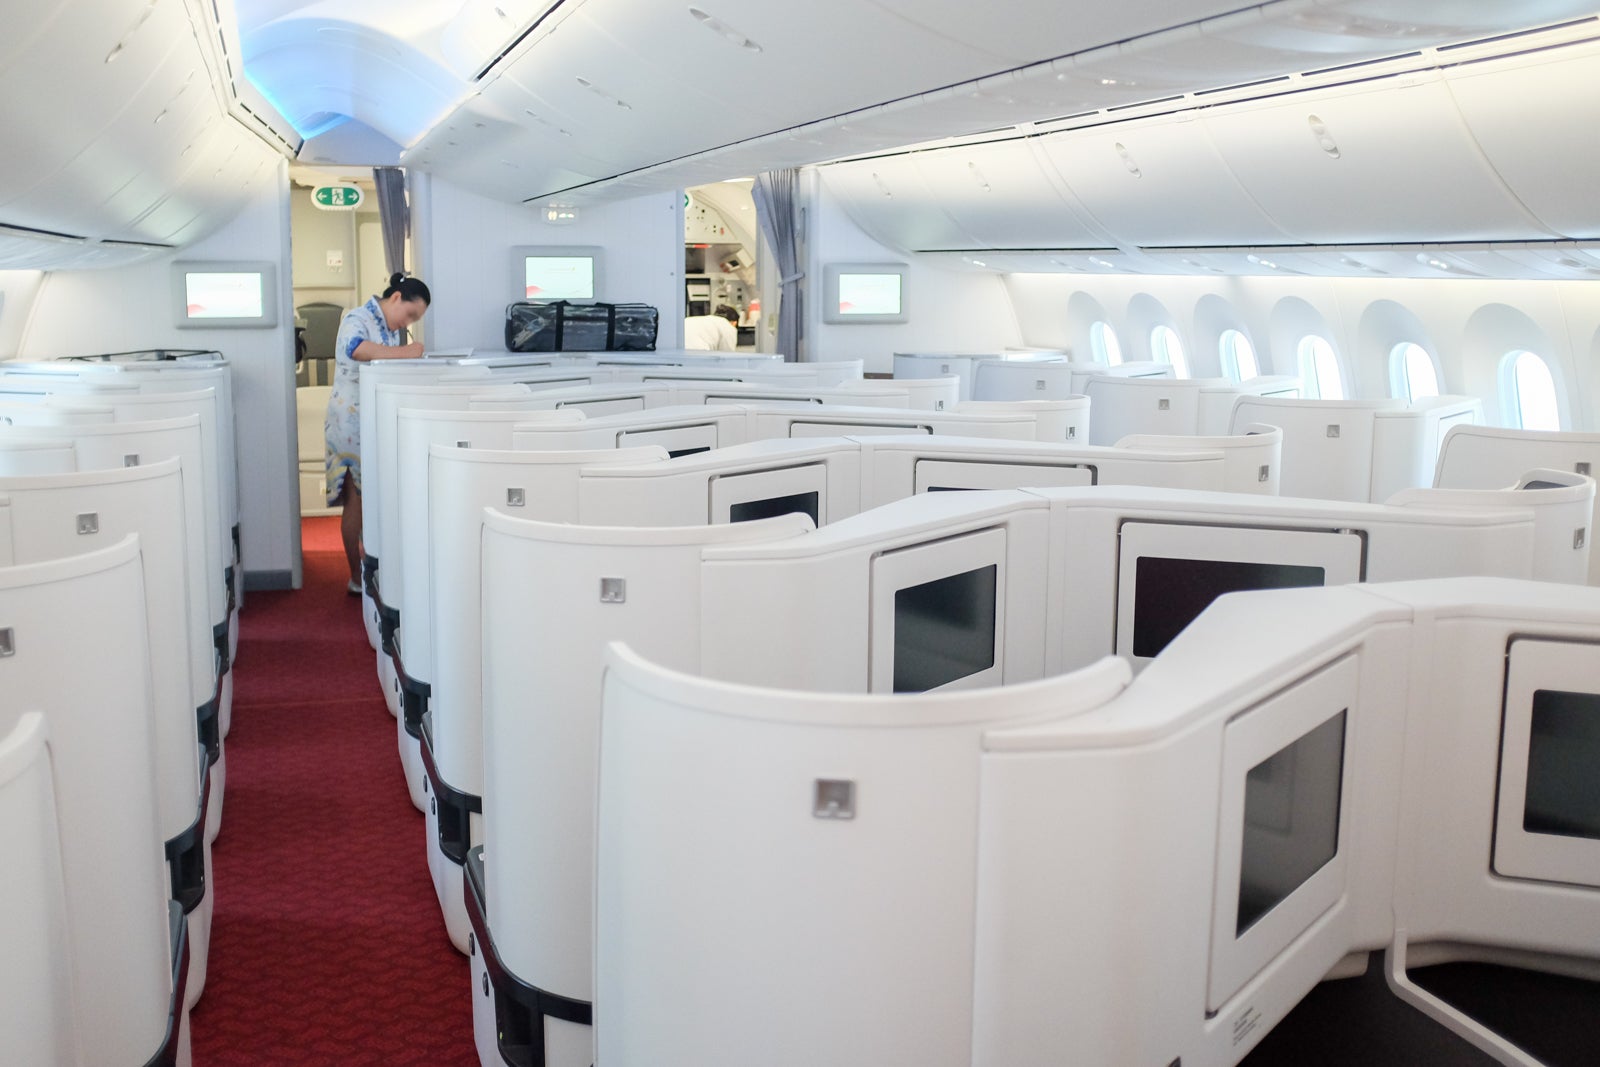 hainan airlines first class